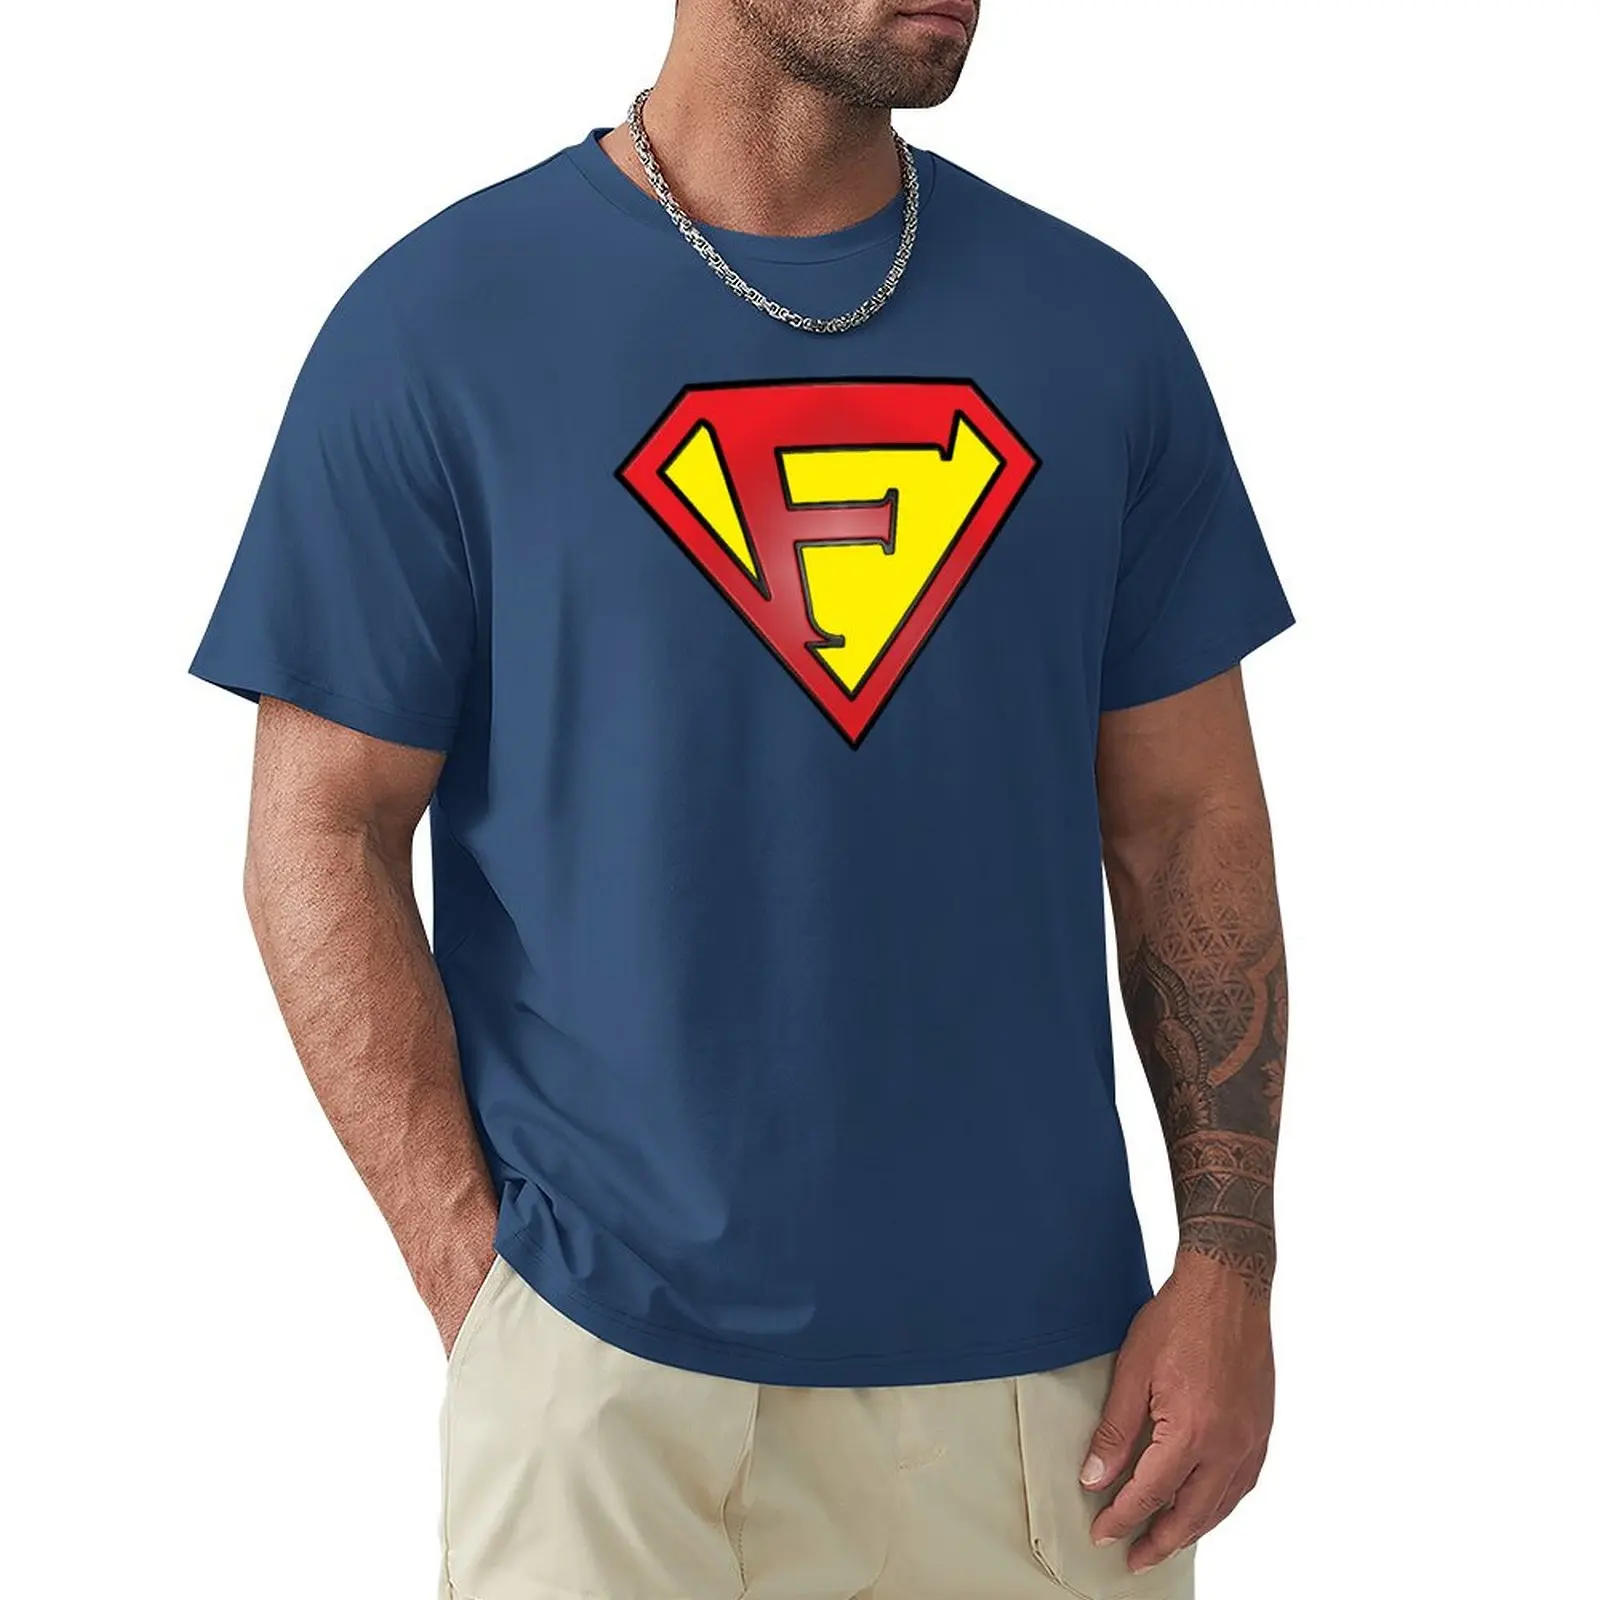 

F-Man! F-Woman! (Classic Hero Me! Collection) T-Shirt Short sleeve tee sublime quick drying cute tops mens graphic t-shirts